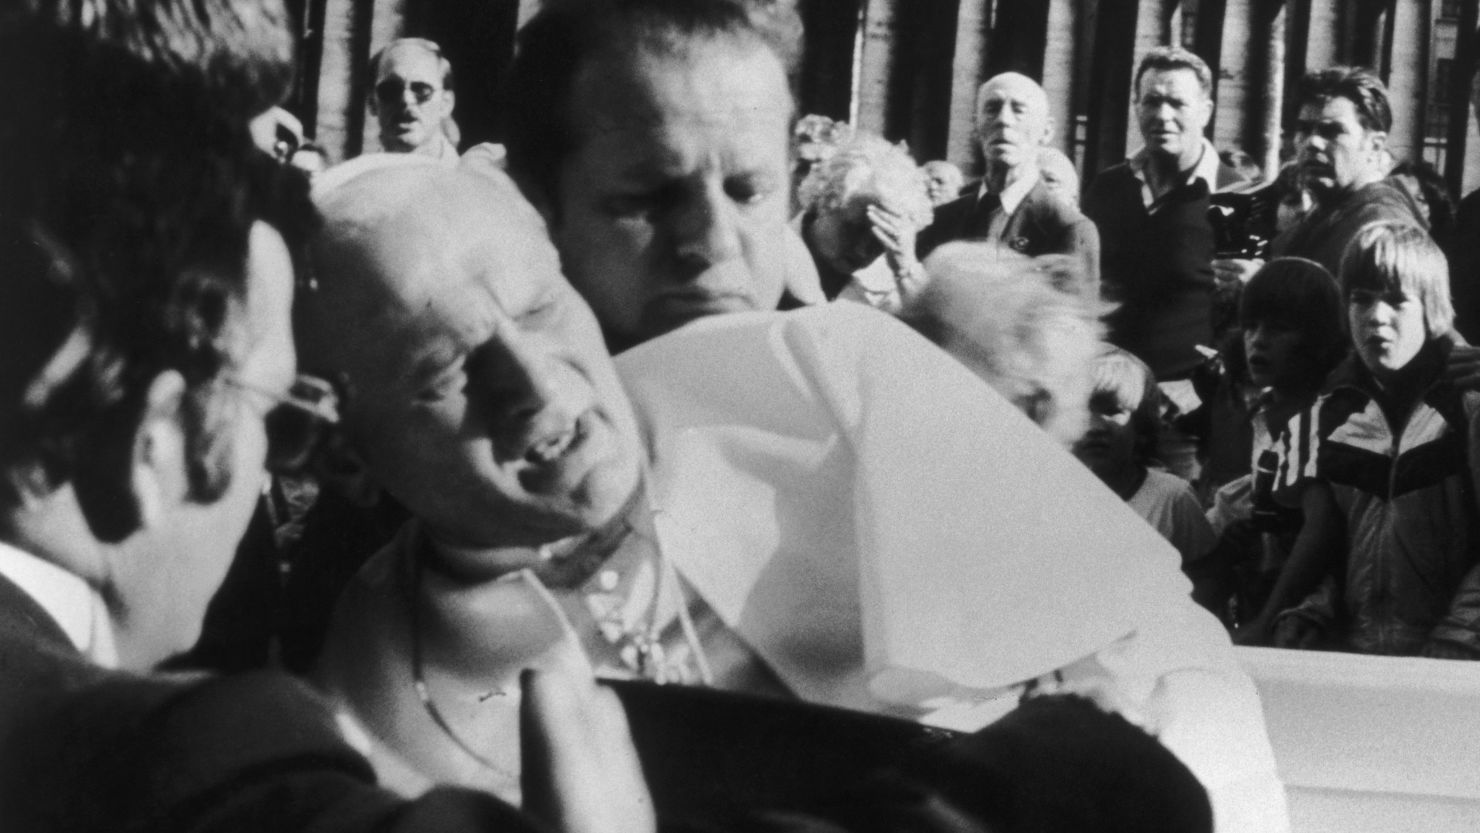 Pope John Paul II reacts after being shot by would-be assassin Mehmet Ali Agca in St Peter's Square, 13th May 1981.